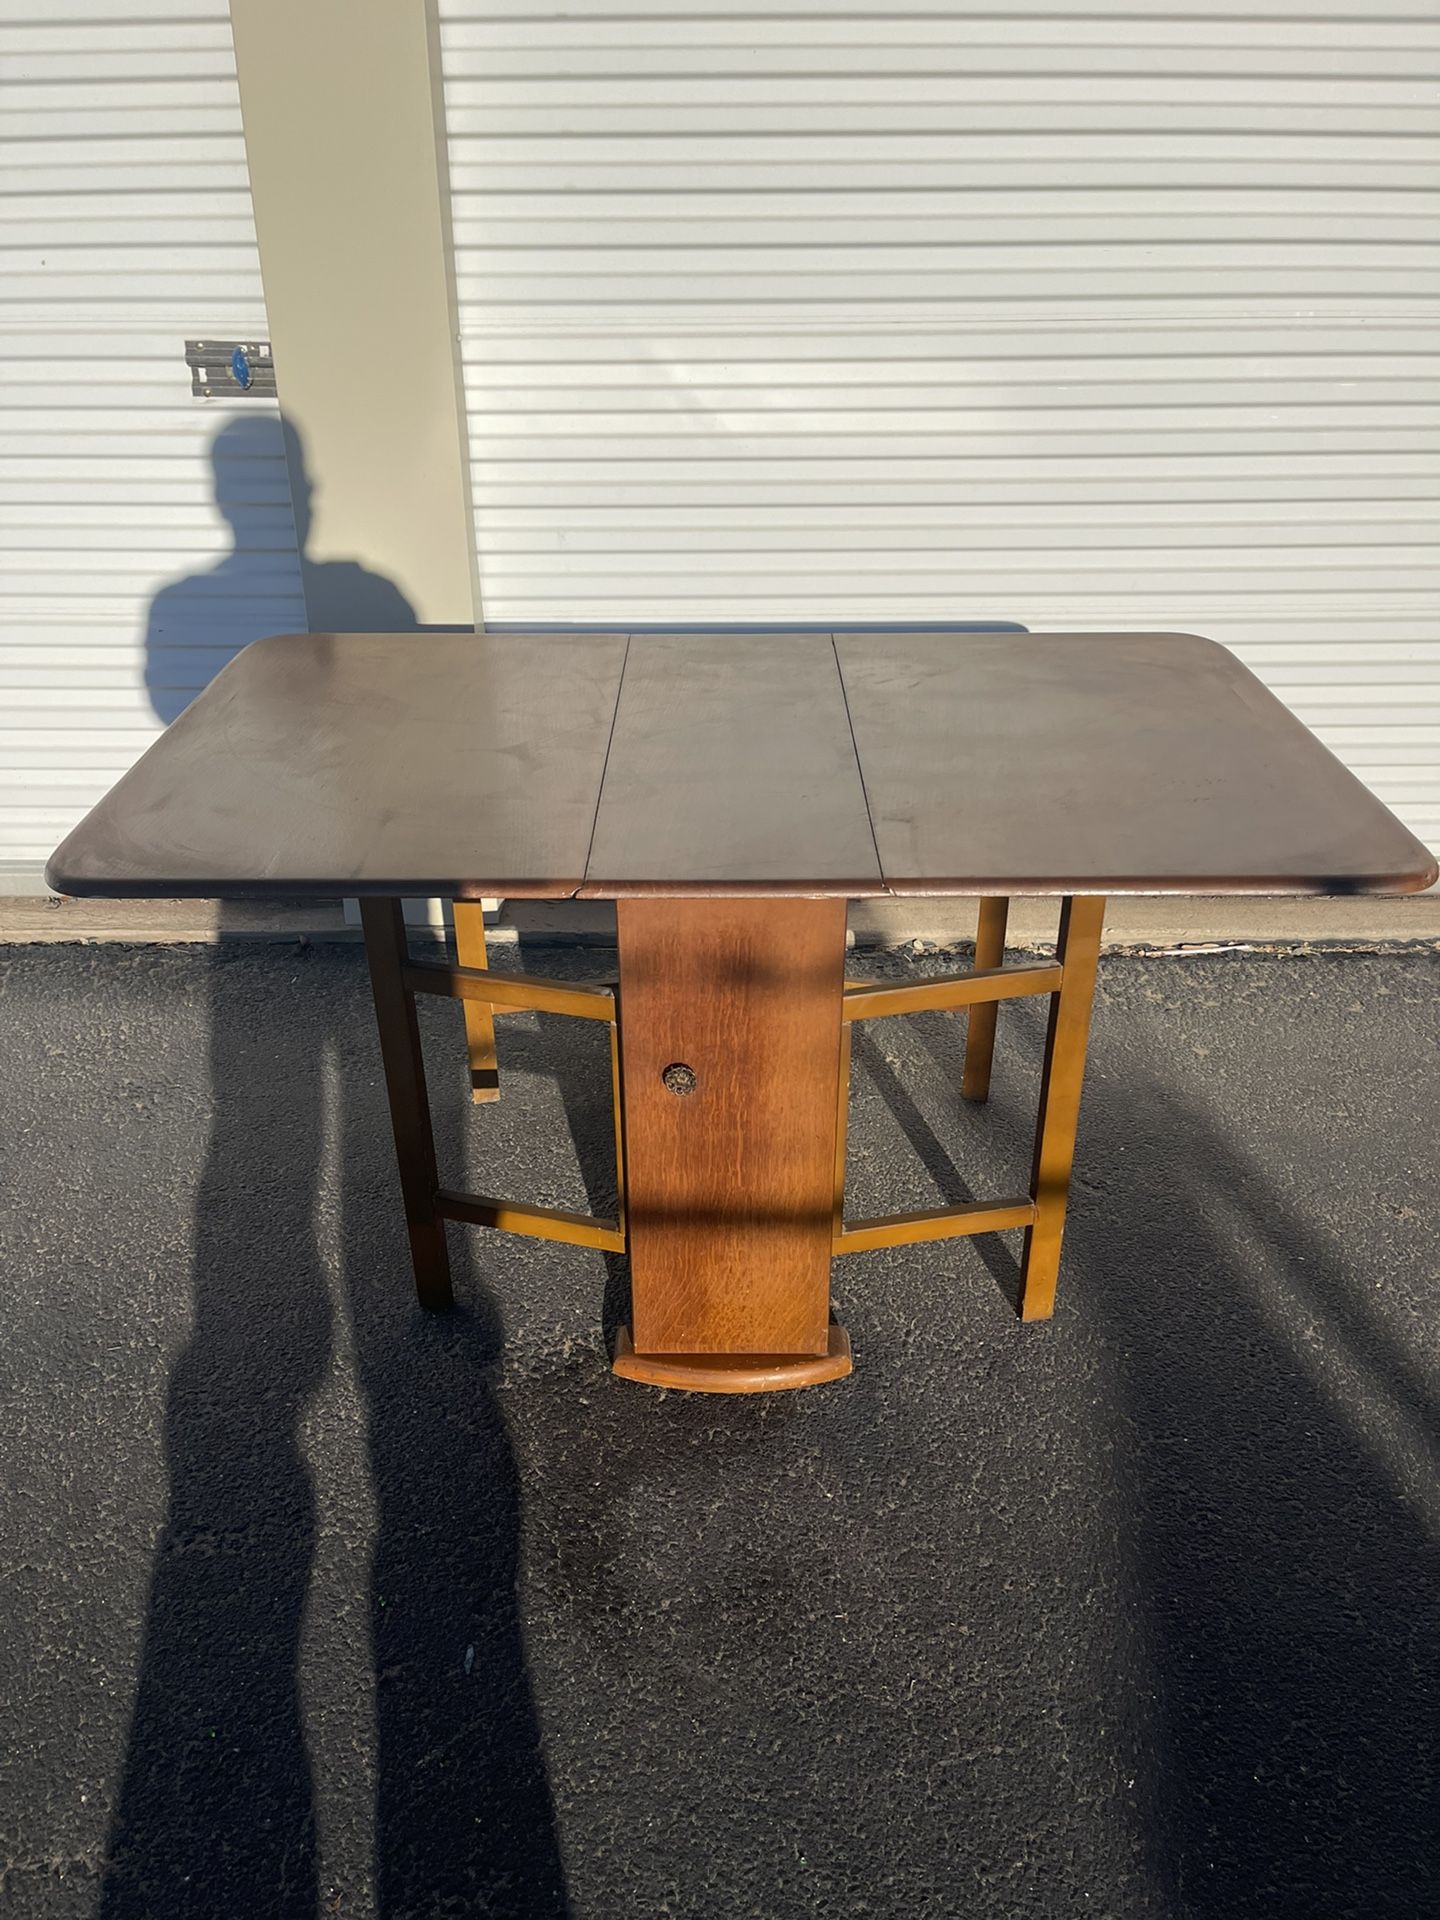 Antique drop leaf table with two doors